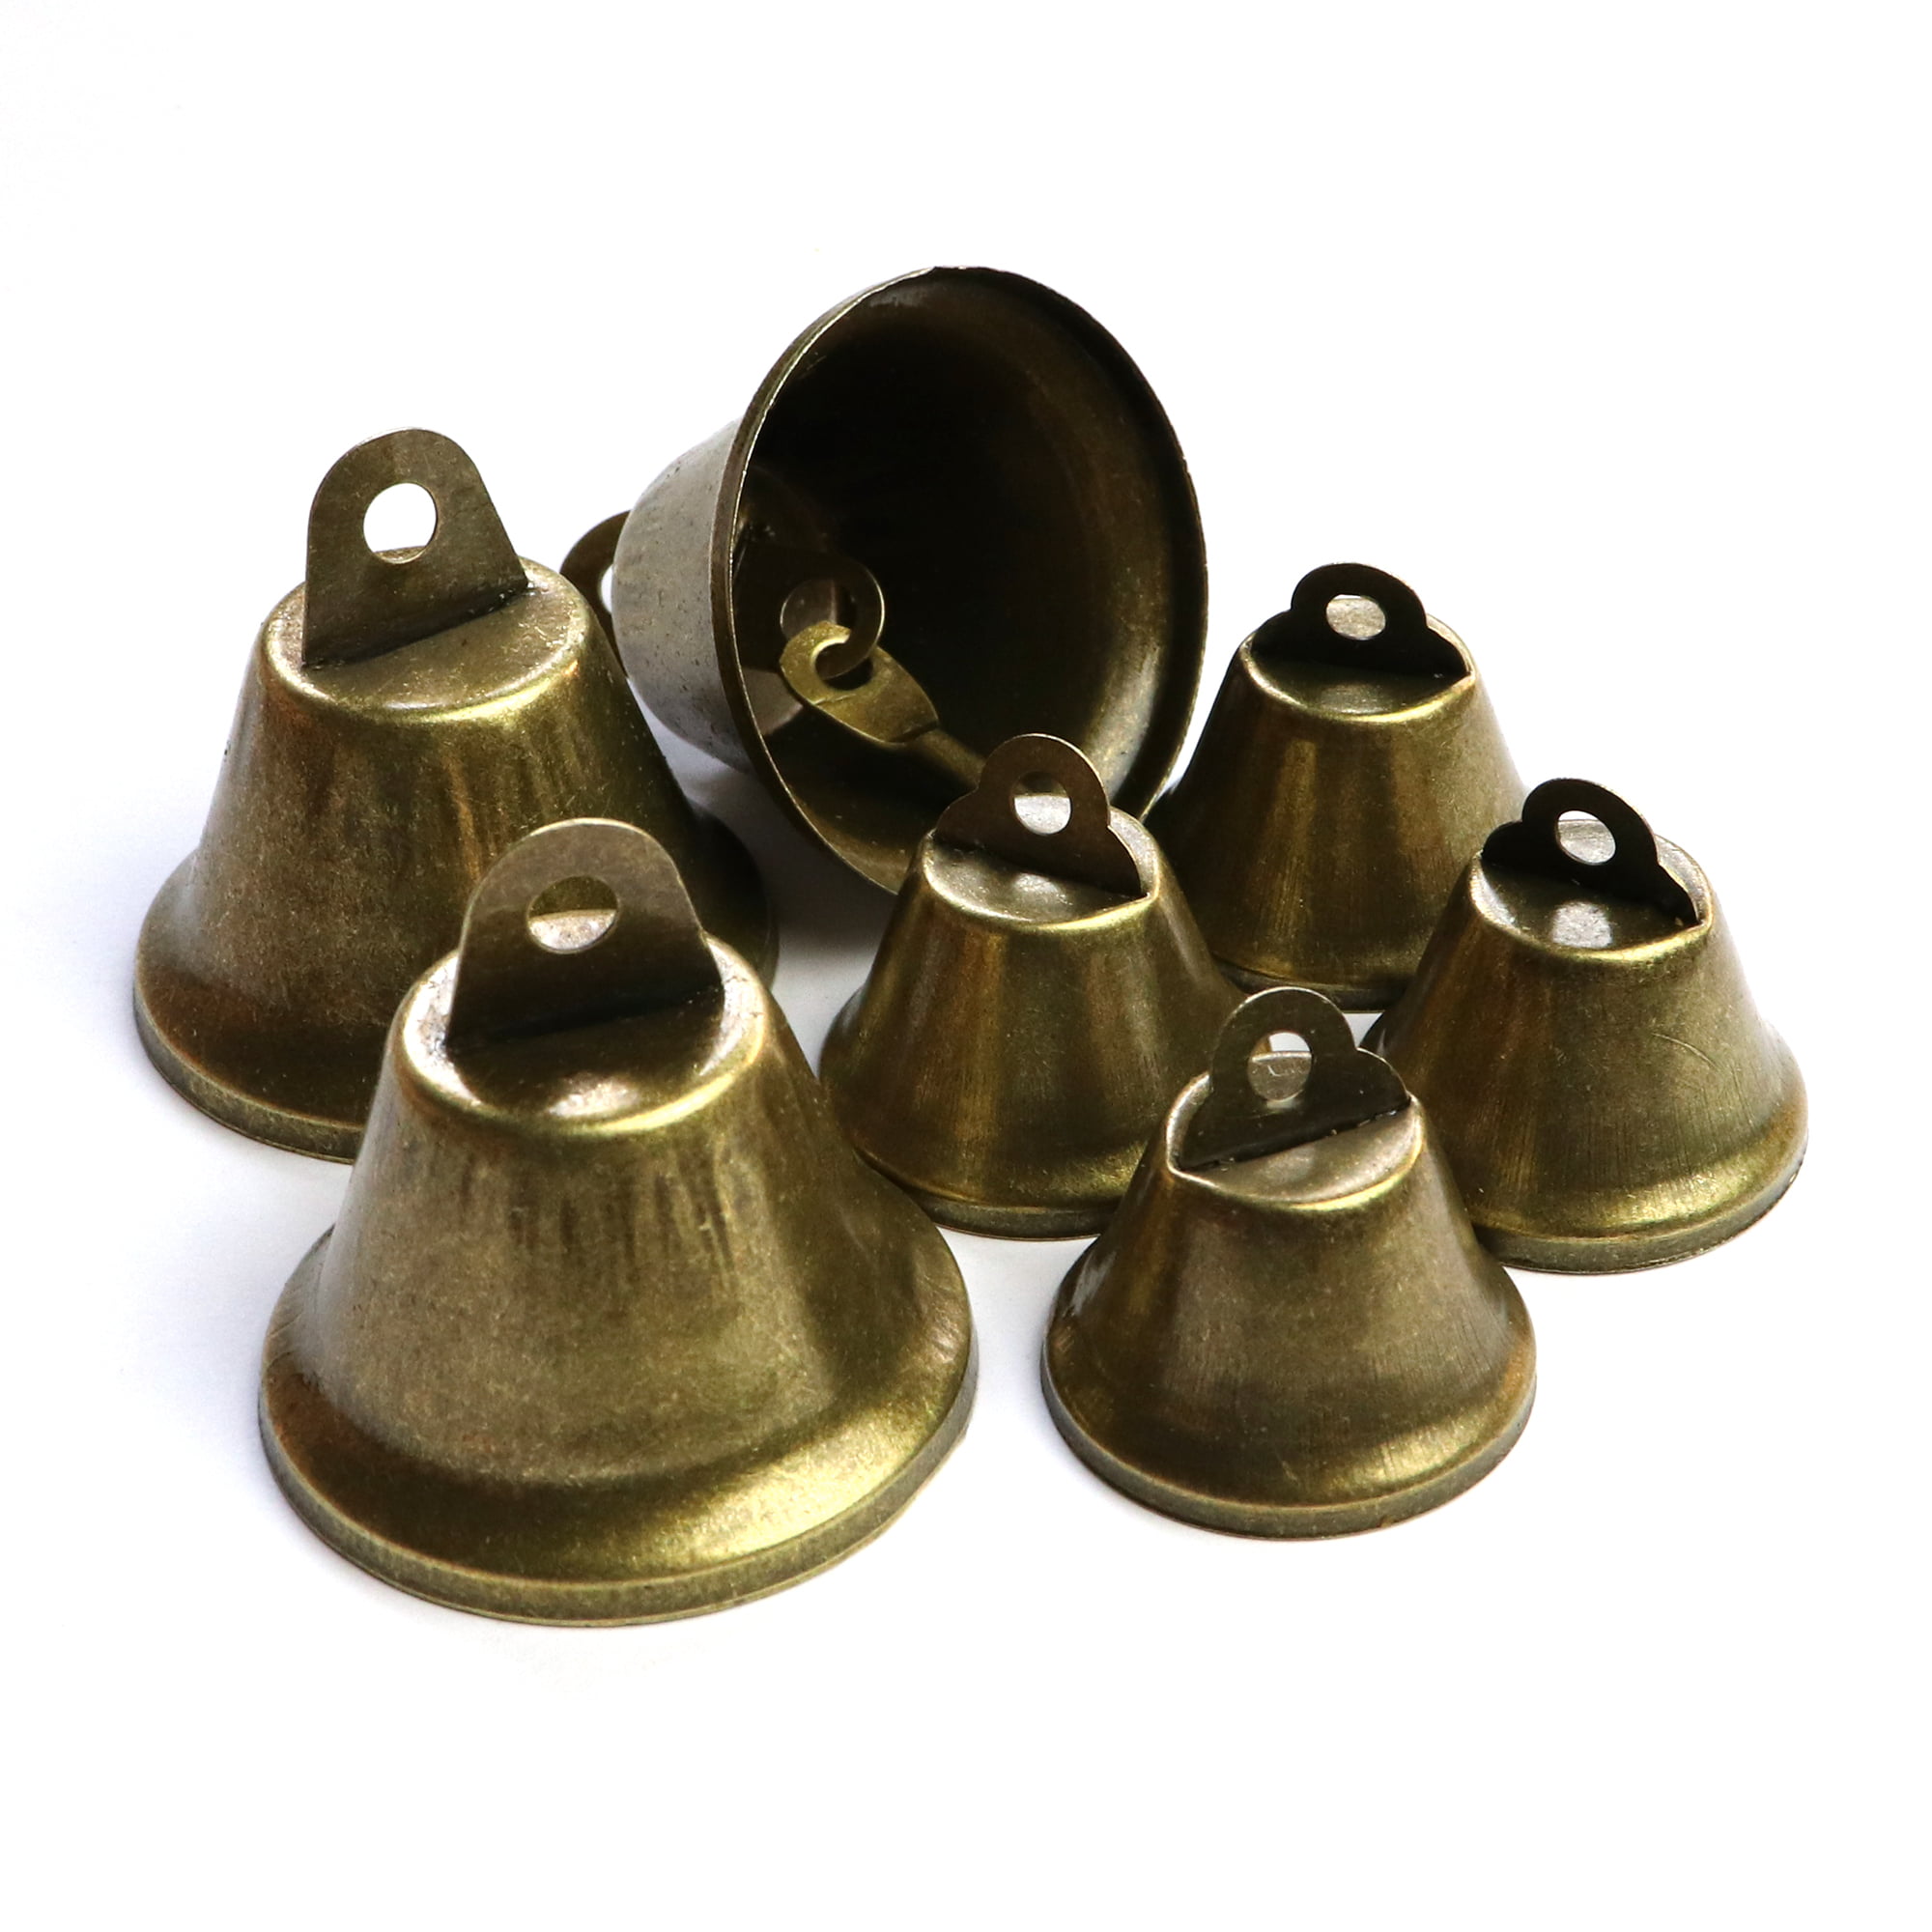 Limnyves 30 Pcs Bells Craft Small Bells Brass Bells Vintage Bells with Hooks for Hanging Wind Chimes Making Dog Training, Bronze